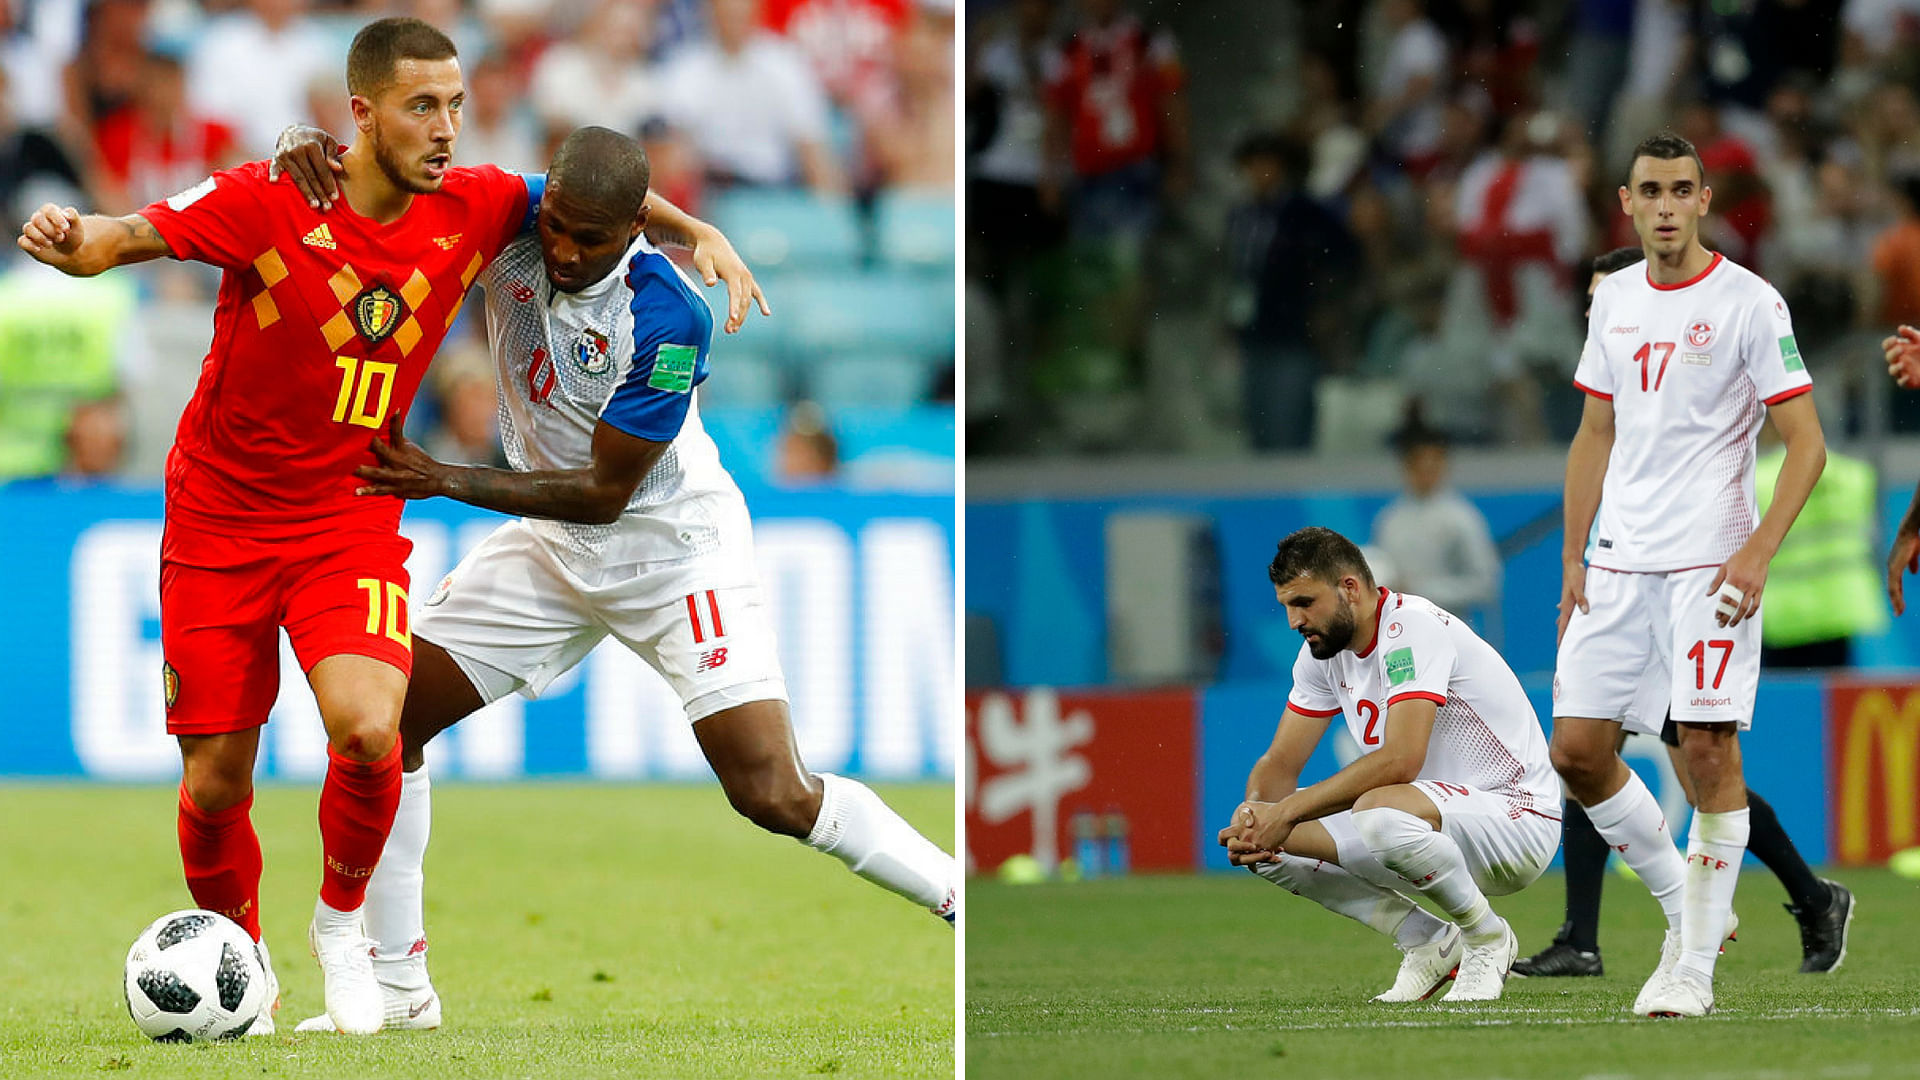 Eden Hazard (left, 10) has been successful in the midfield. Tunisia need to move past a stoppage time loss against England to stop him.